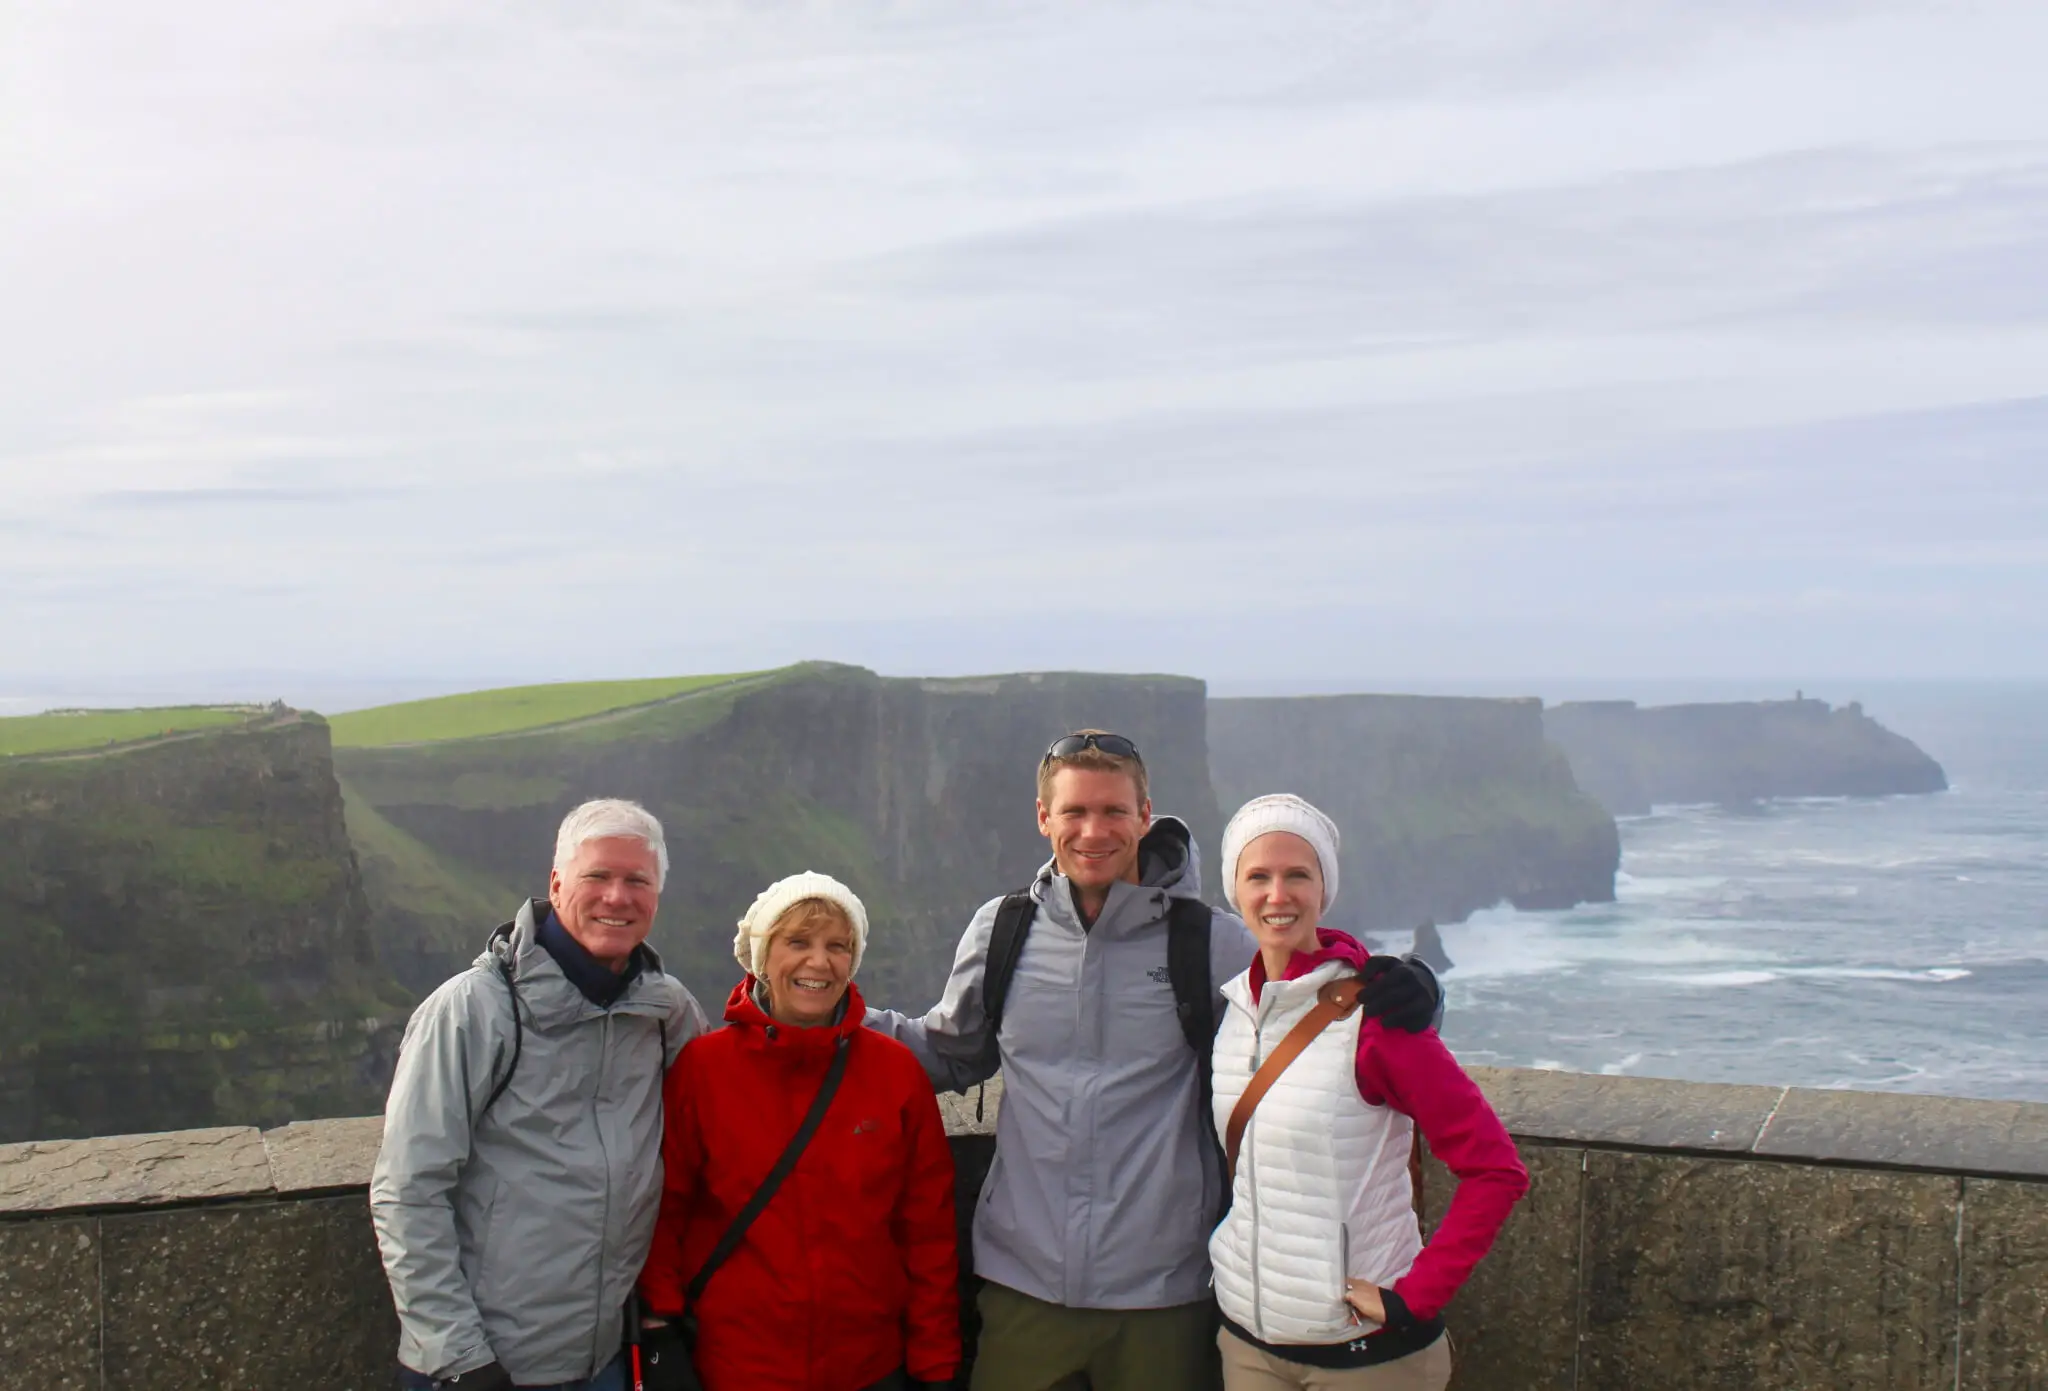 Gwen, M, and M's parents in front of the Cliffs of Moher